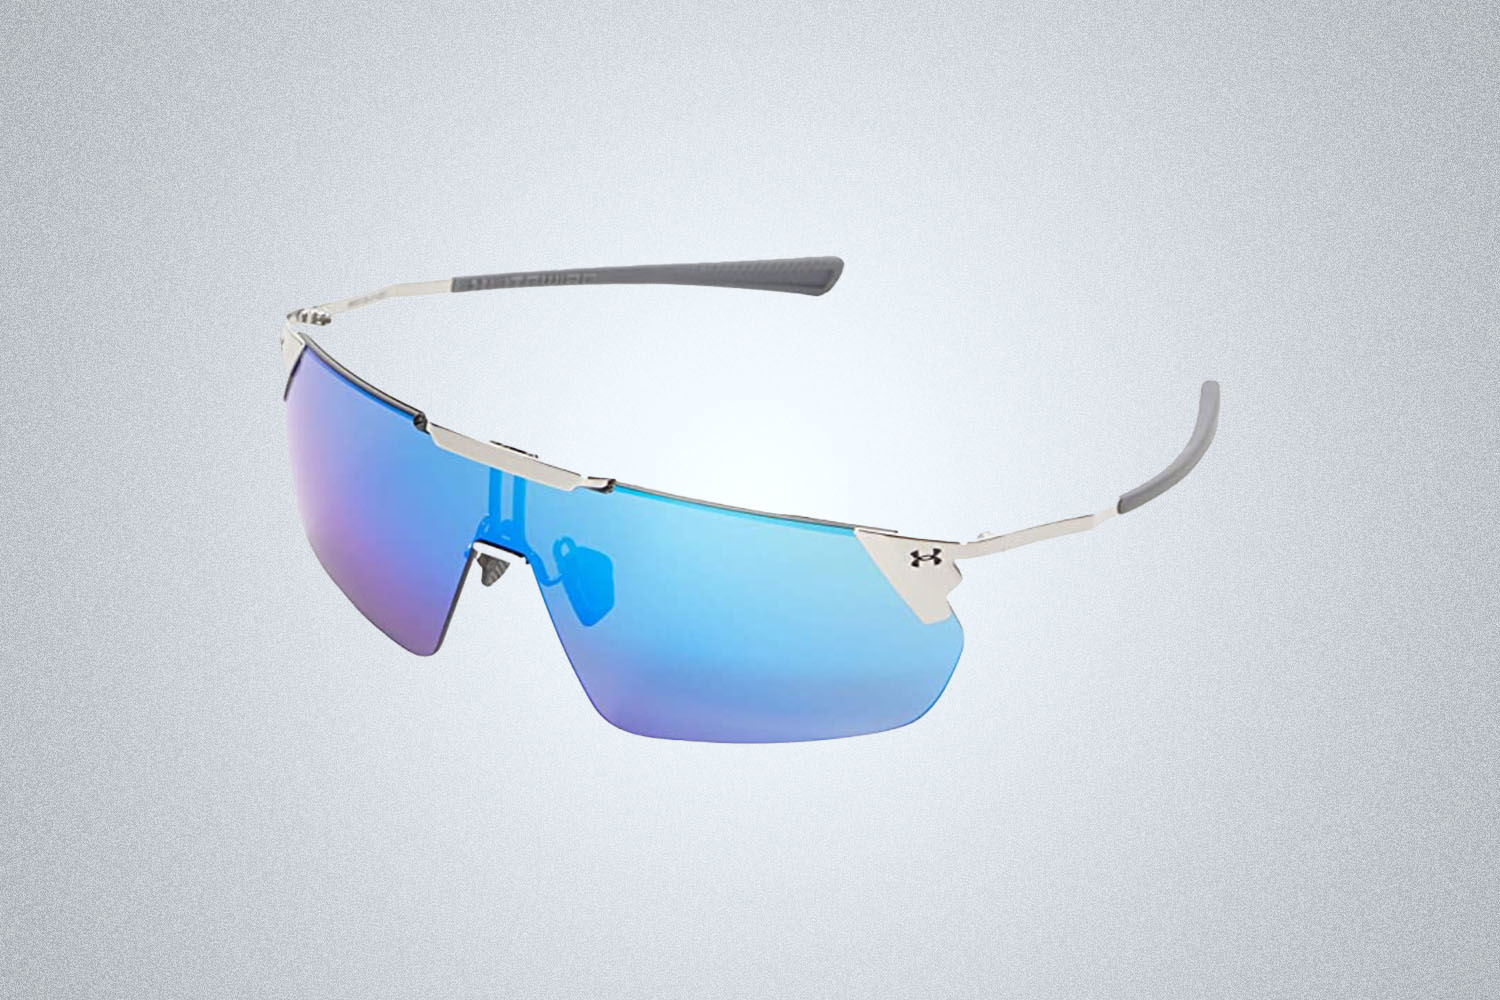 a pair of sunglasses on a grey background